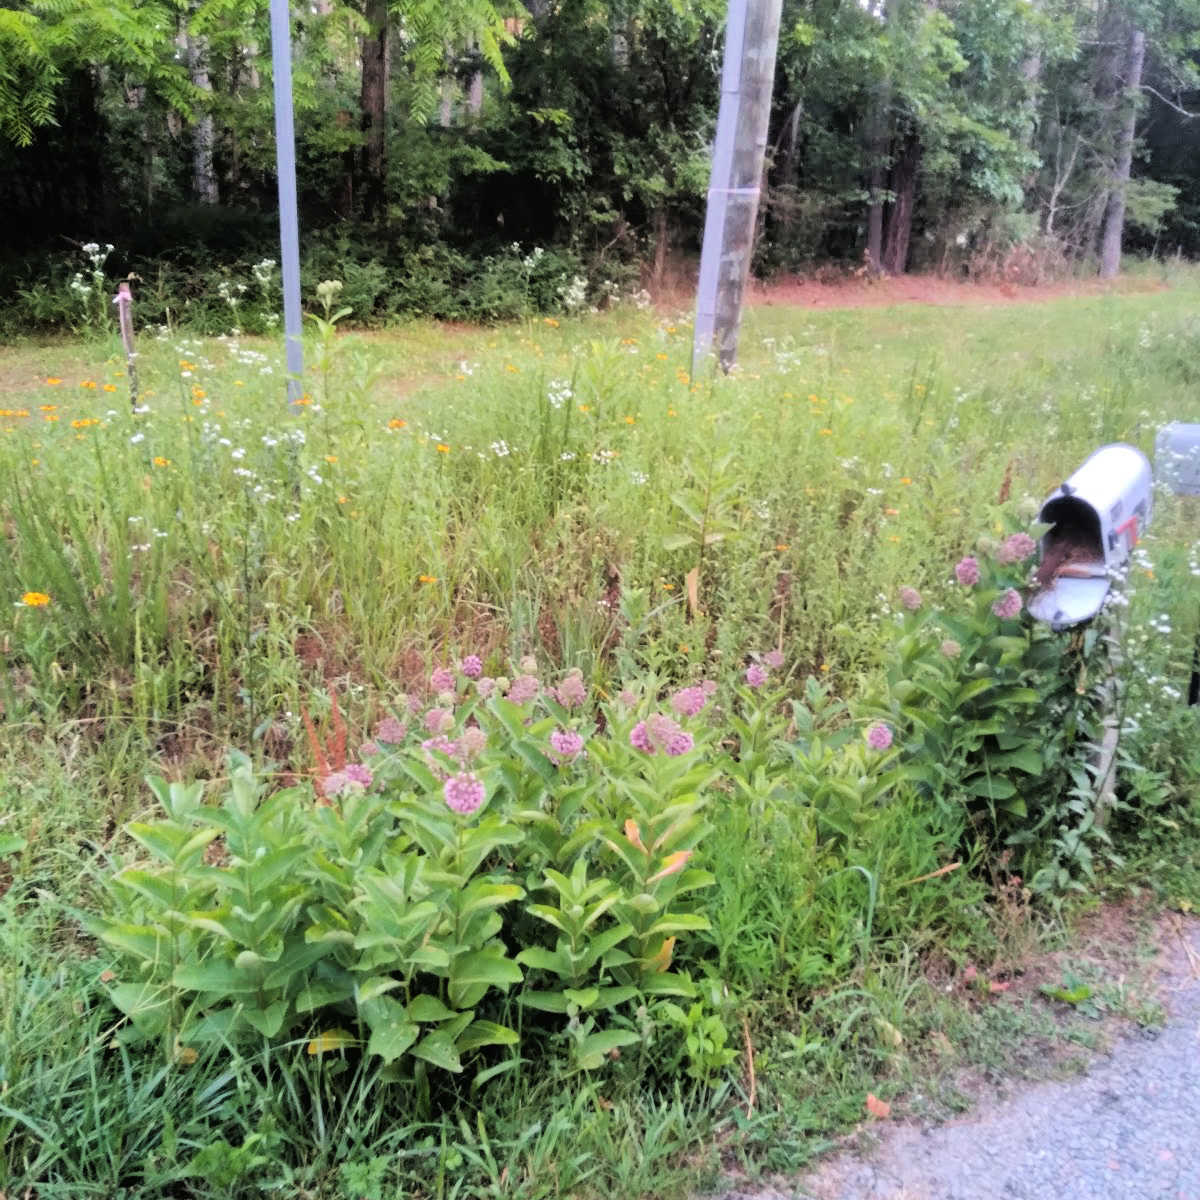 a street corner and mailbox - the corner is planted with abundant wild flowers